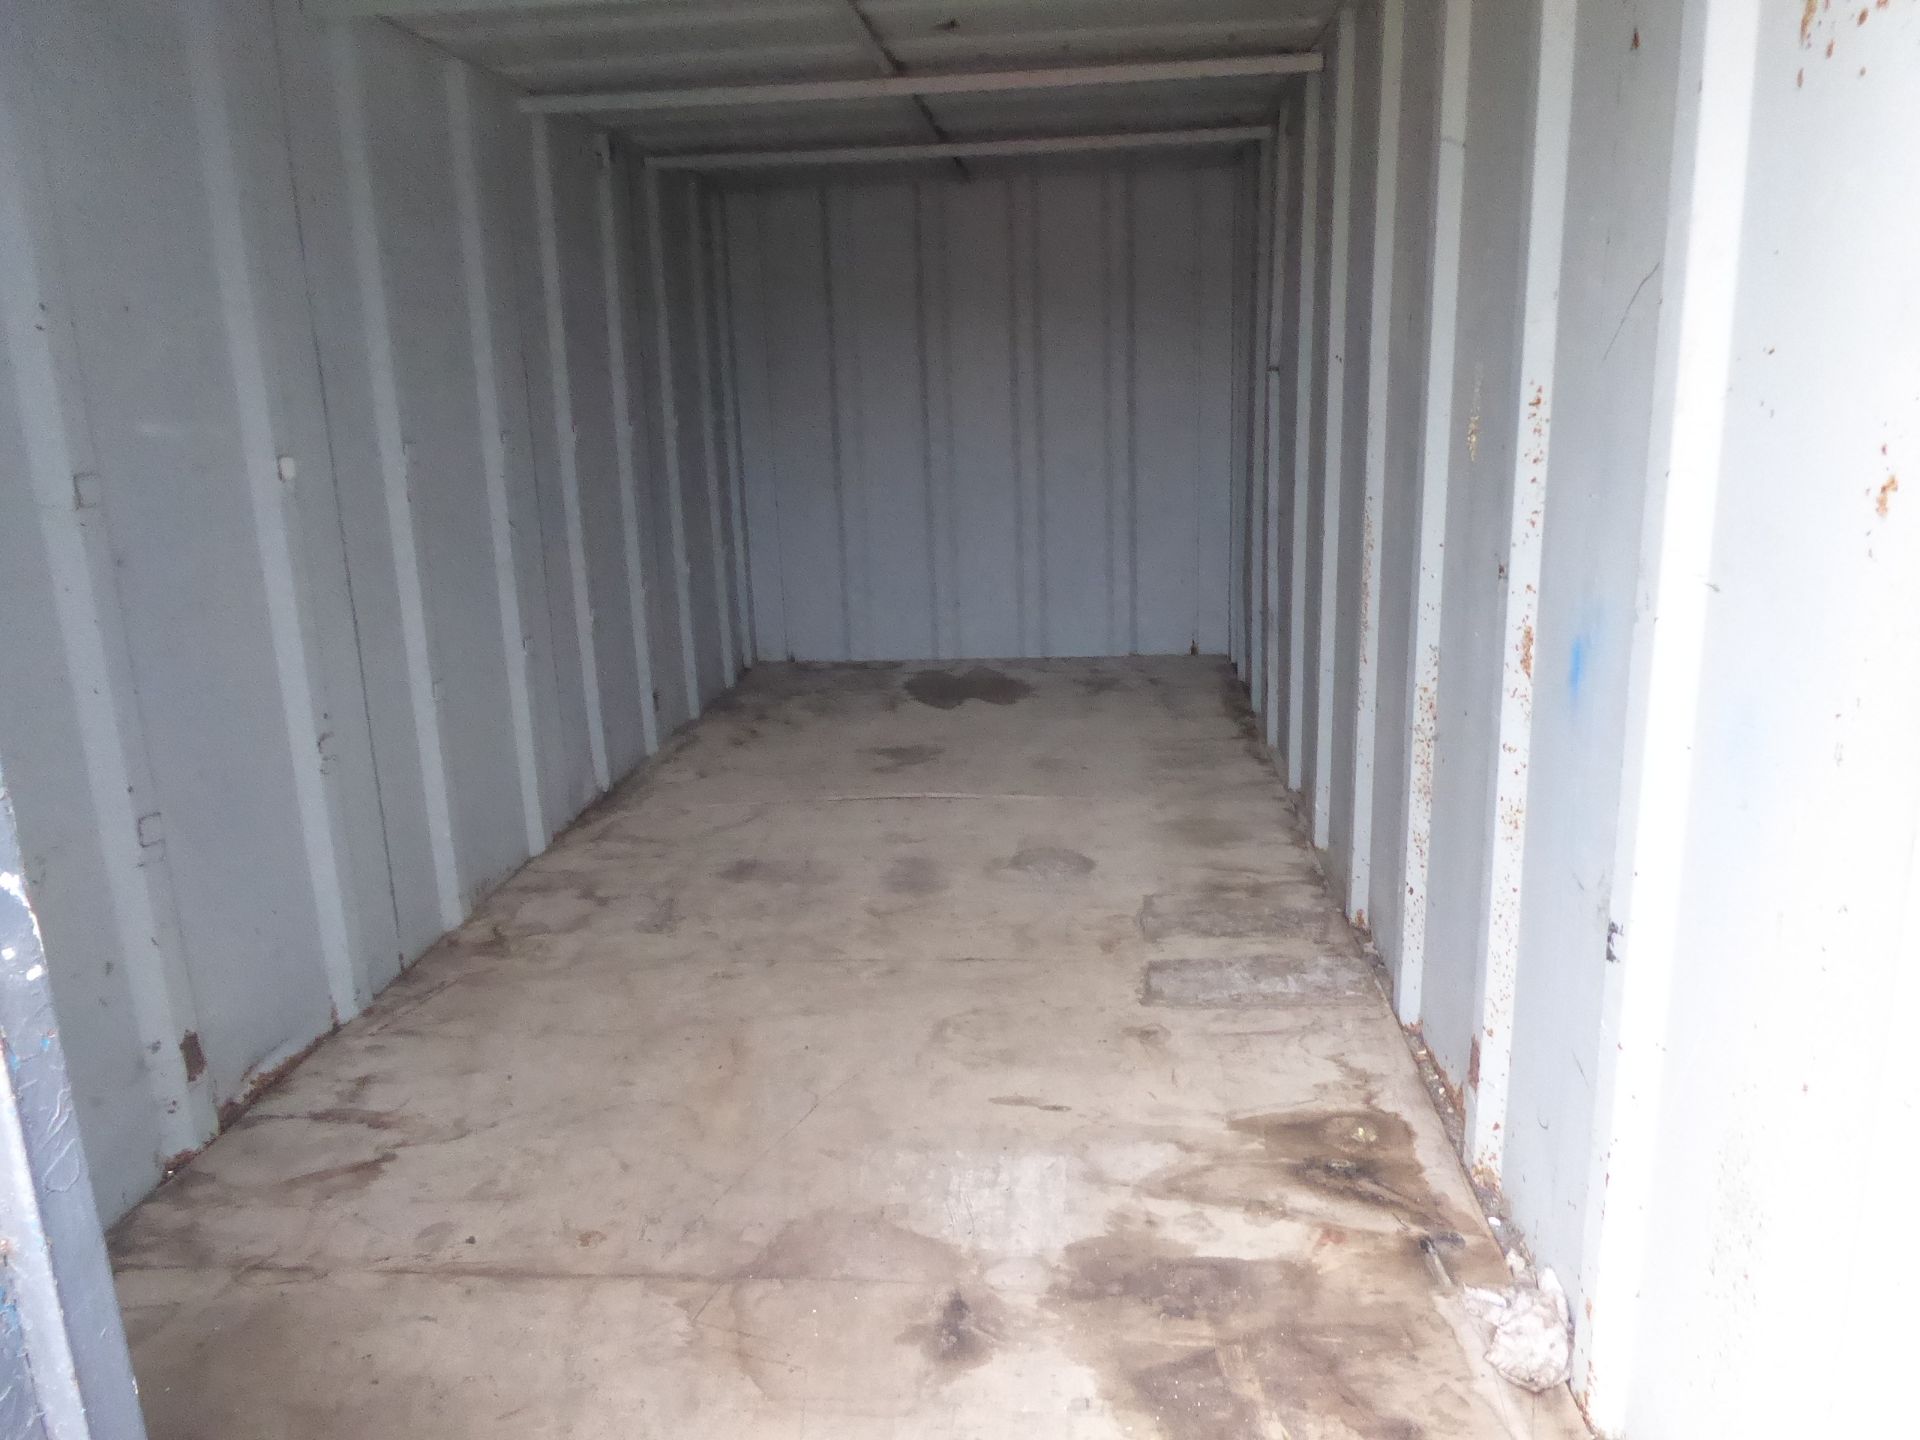 20ft steel container - Image 3 of 3